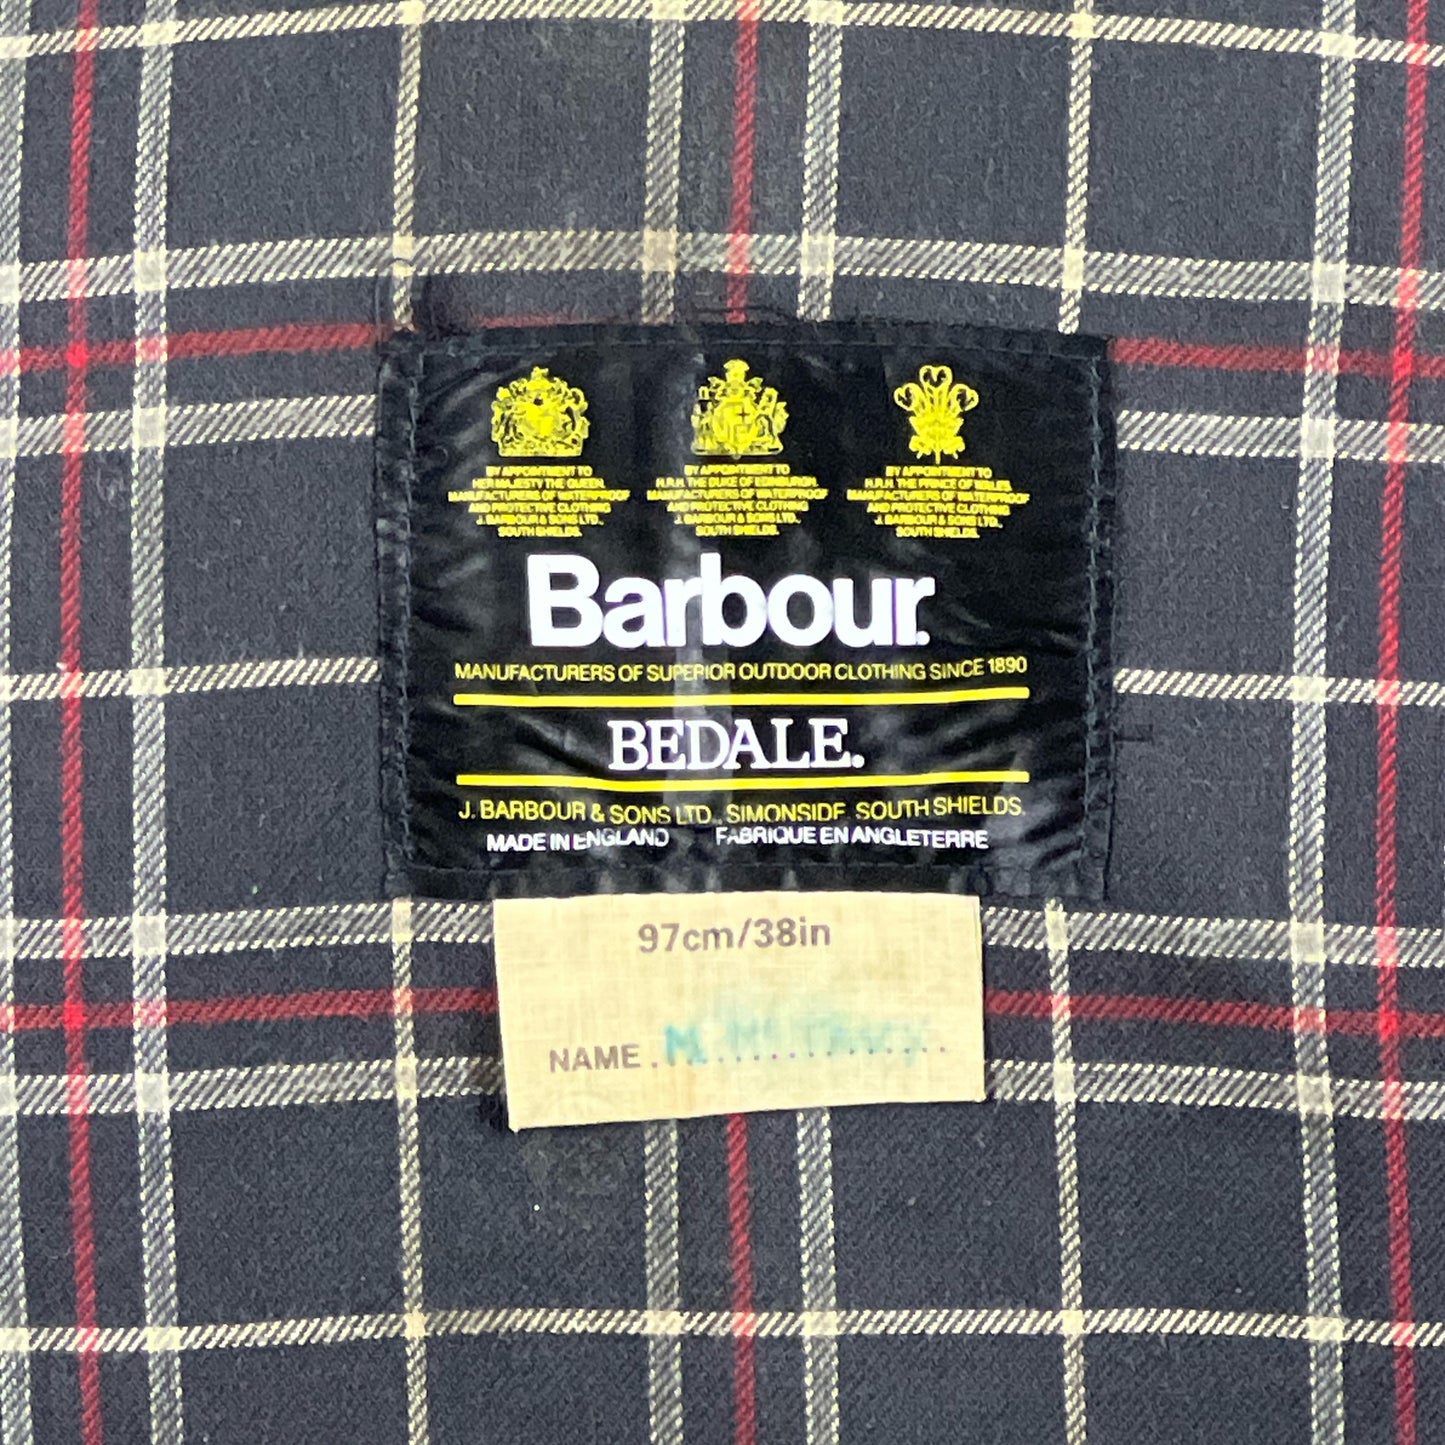 RARO Barbour Bedale 4 tasche C38/97 CM Man Navy vintage Bedale Jacket Small 4 pockets